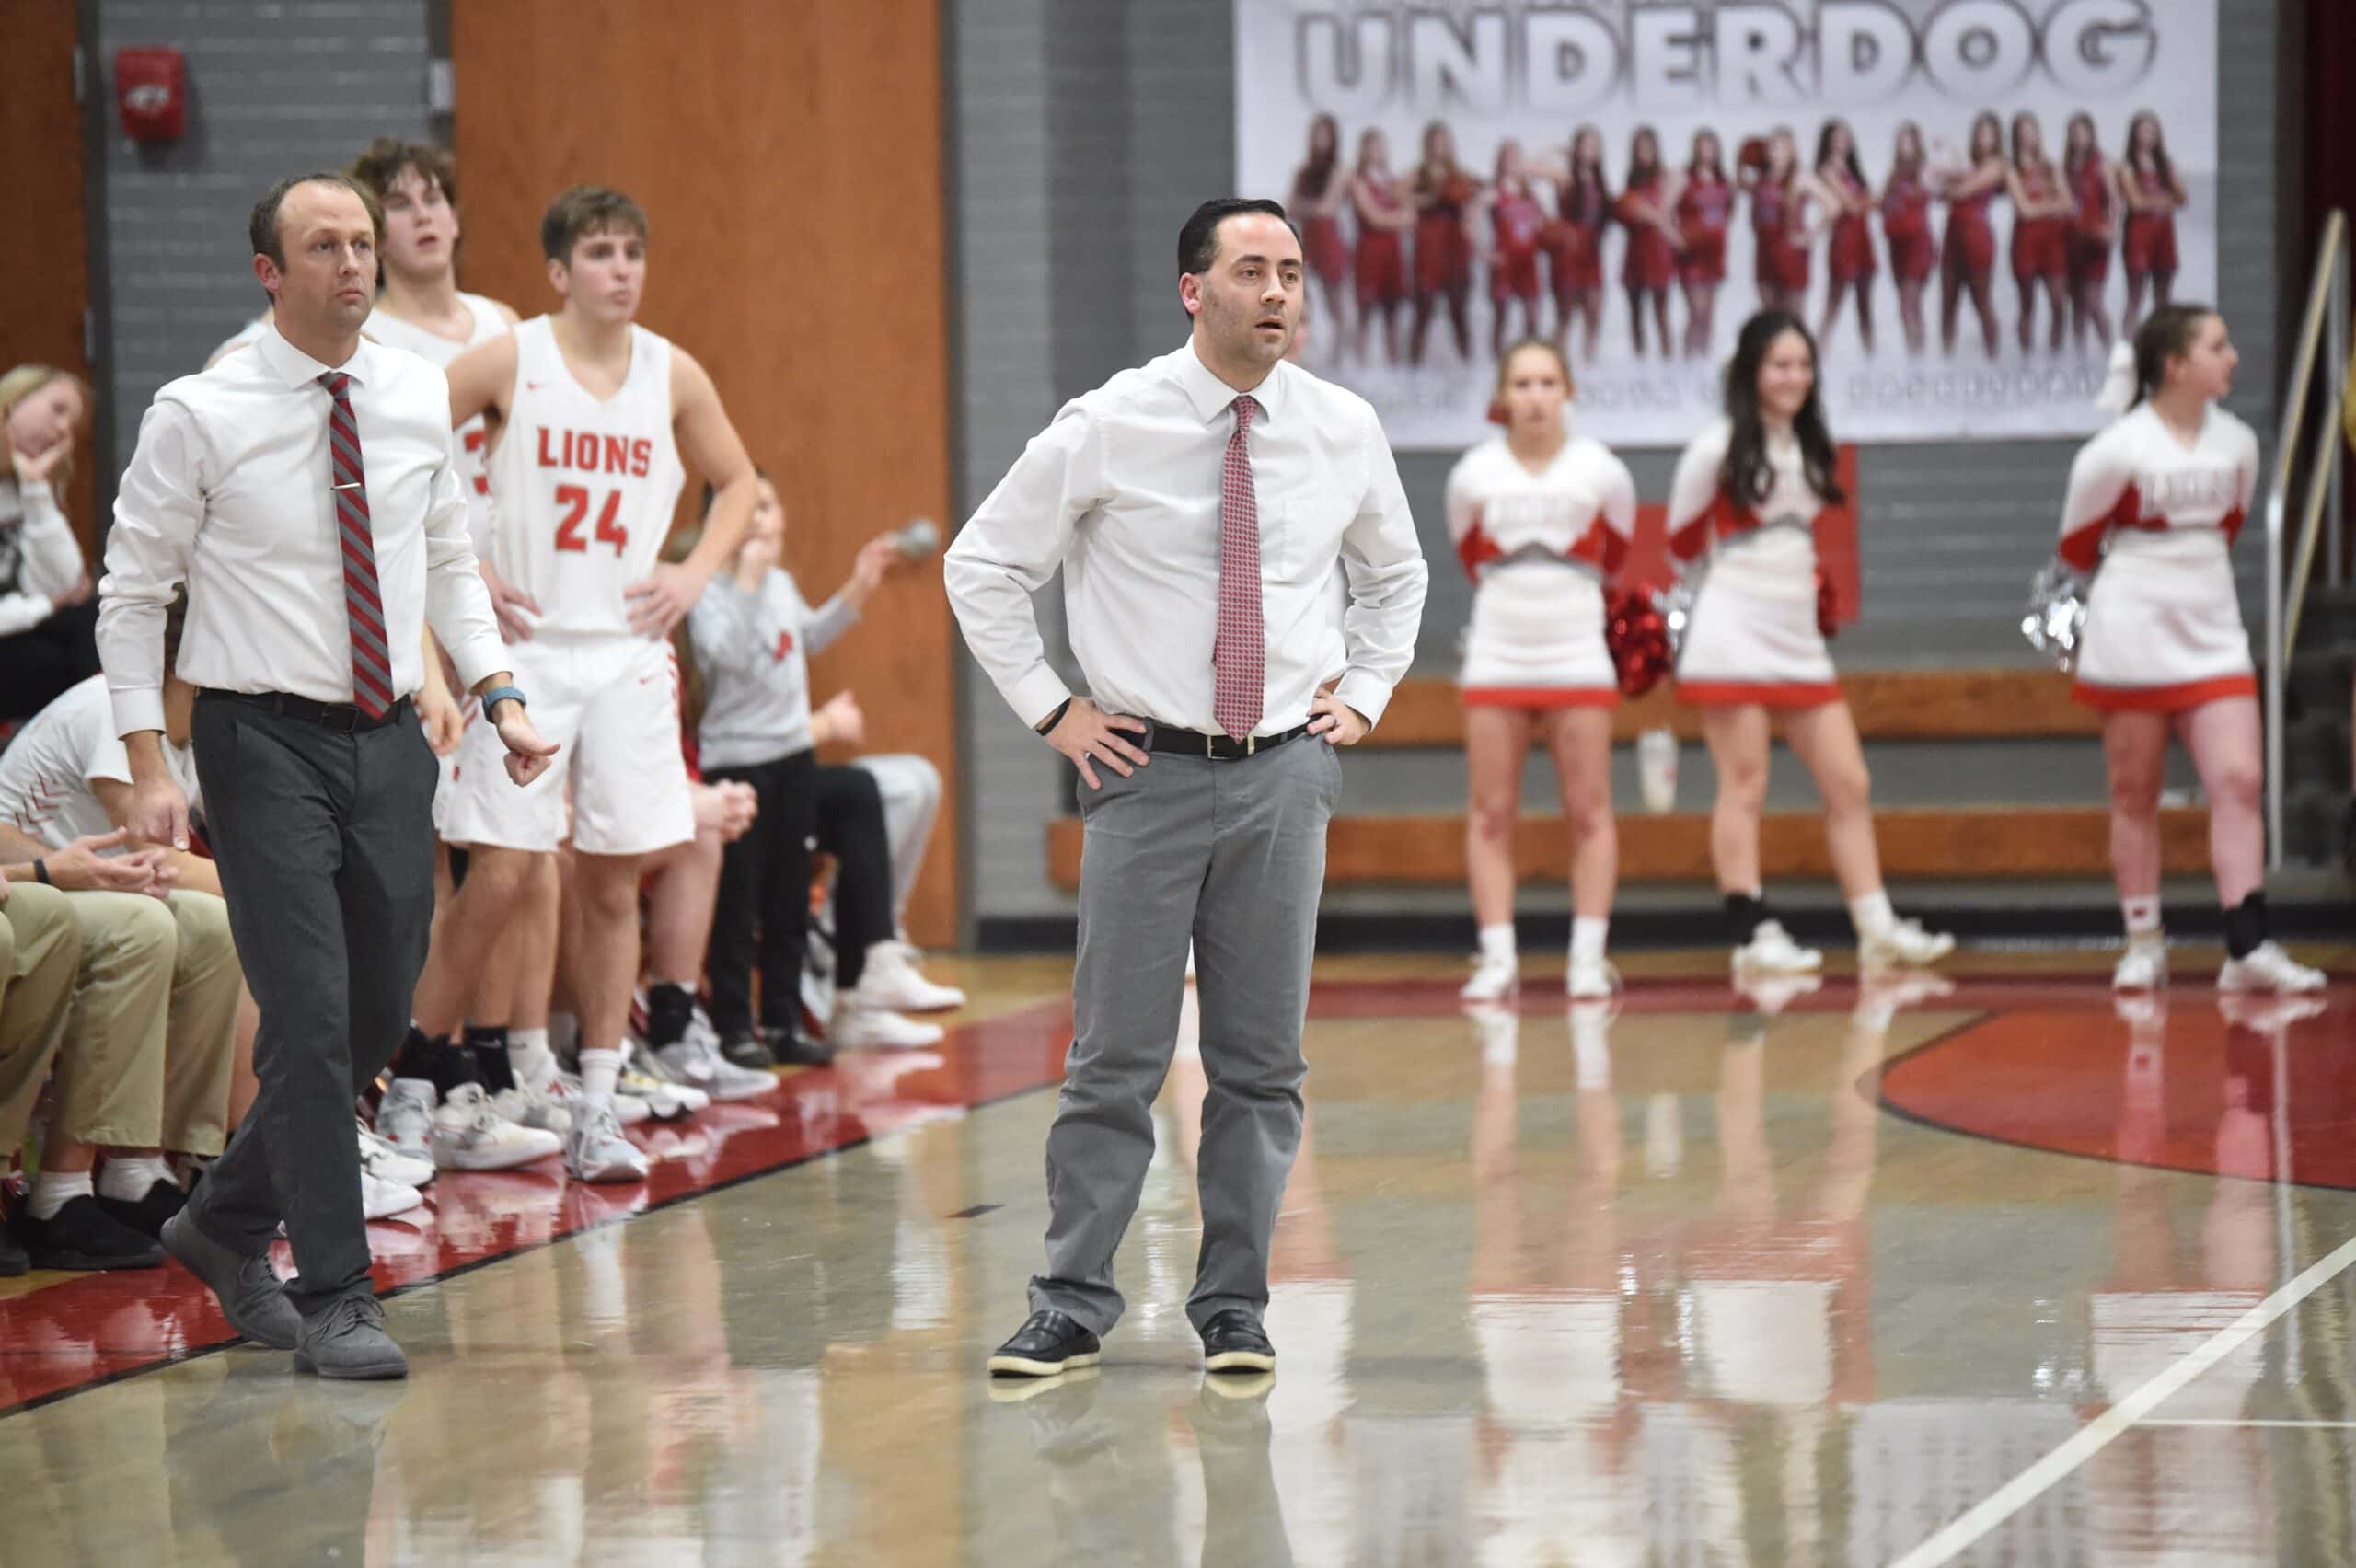 Green resigns from Minerva, becomes new basketball coach at